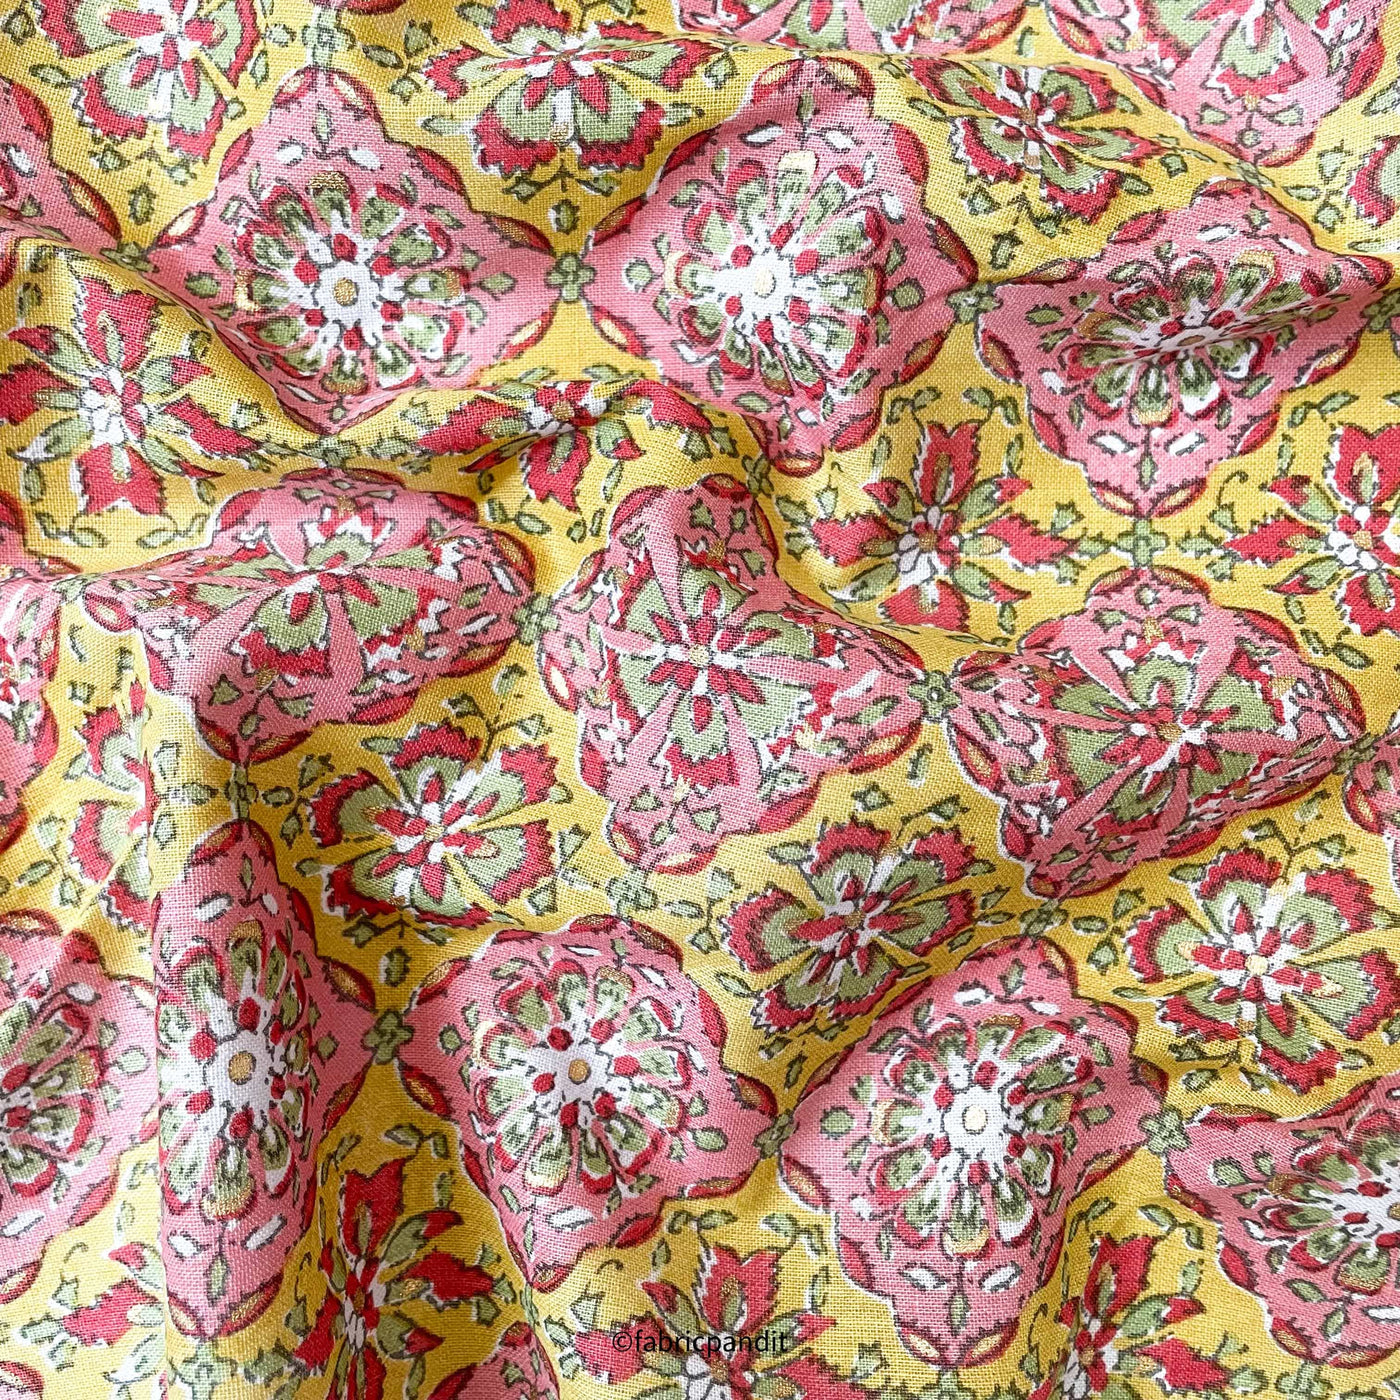 Fabric Pandit Fabric Mustard Yellow & Rose Pink Geometric Floral Hand Block Printed With Foil Pure Cotton Fabric (Width 42 inches)